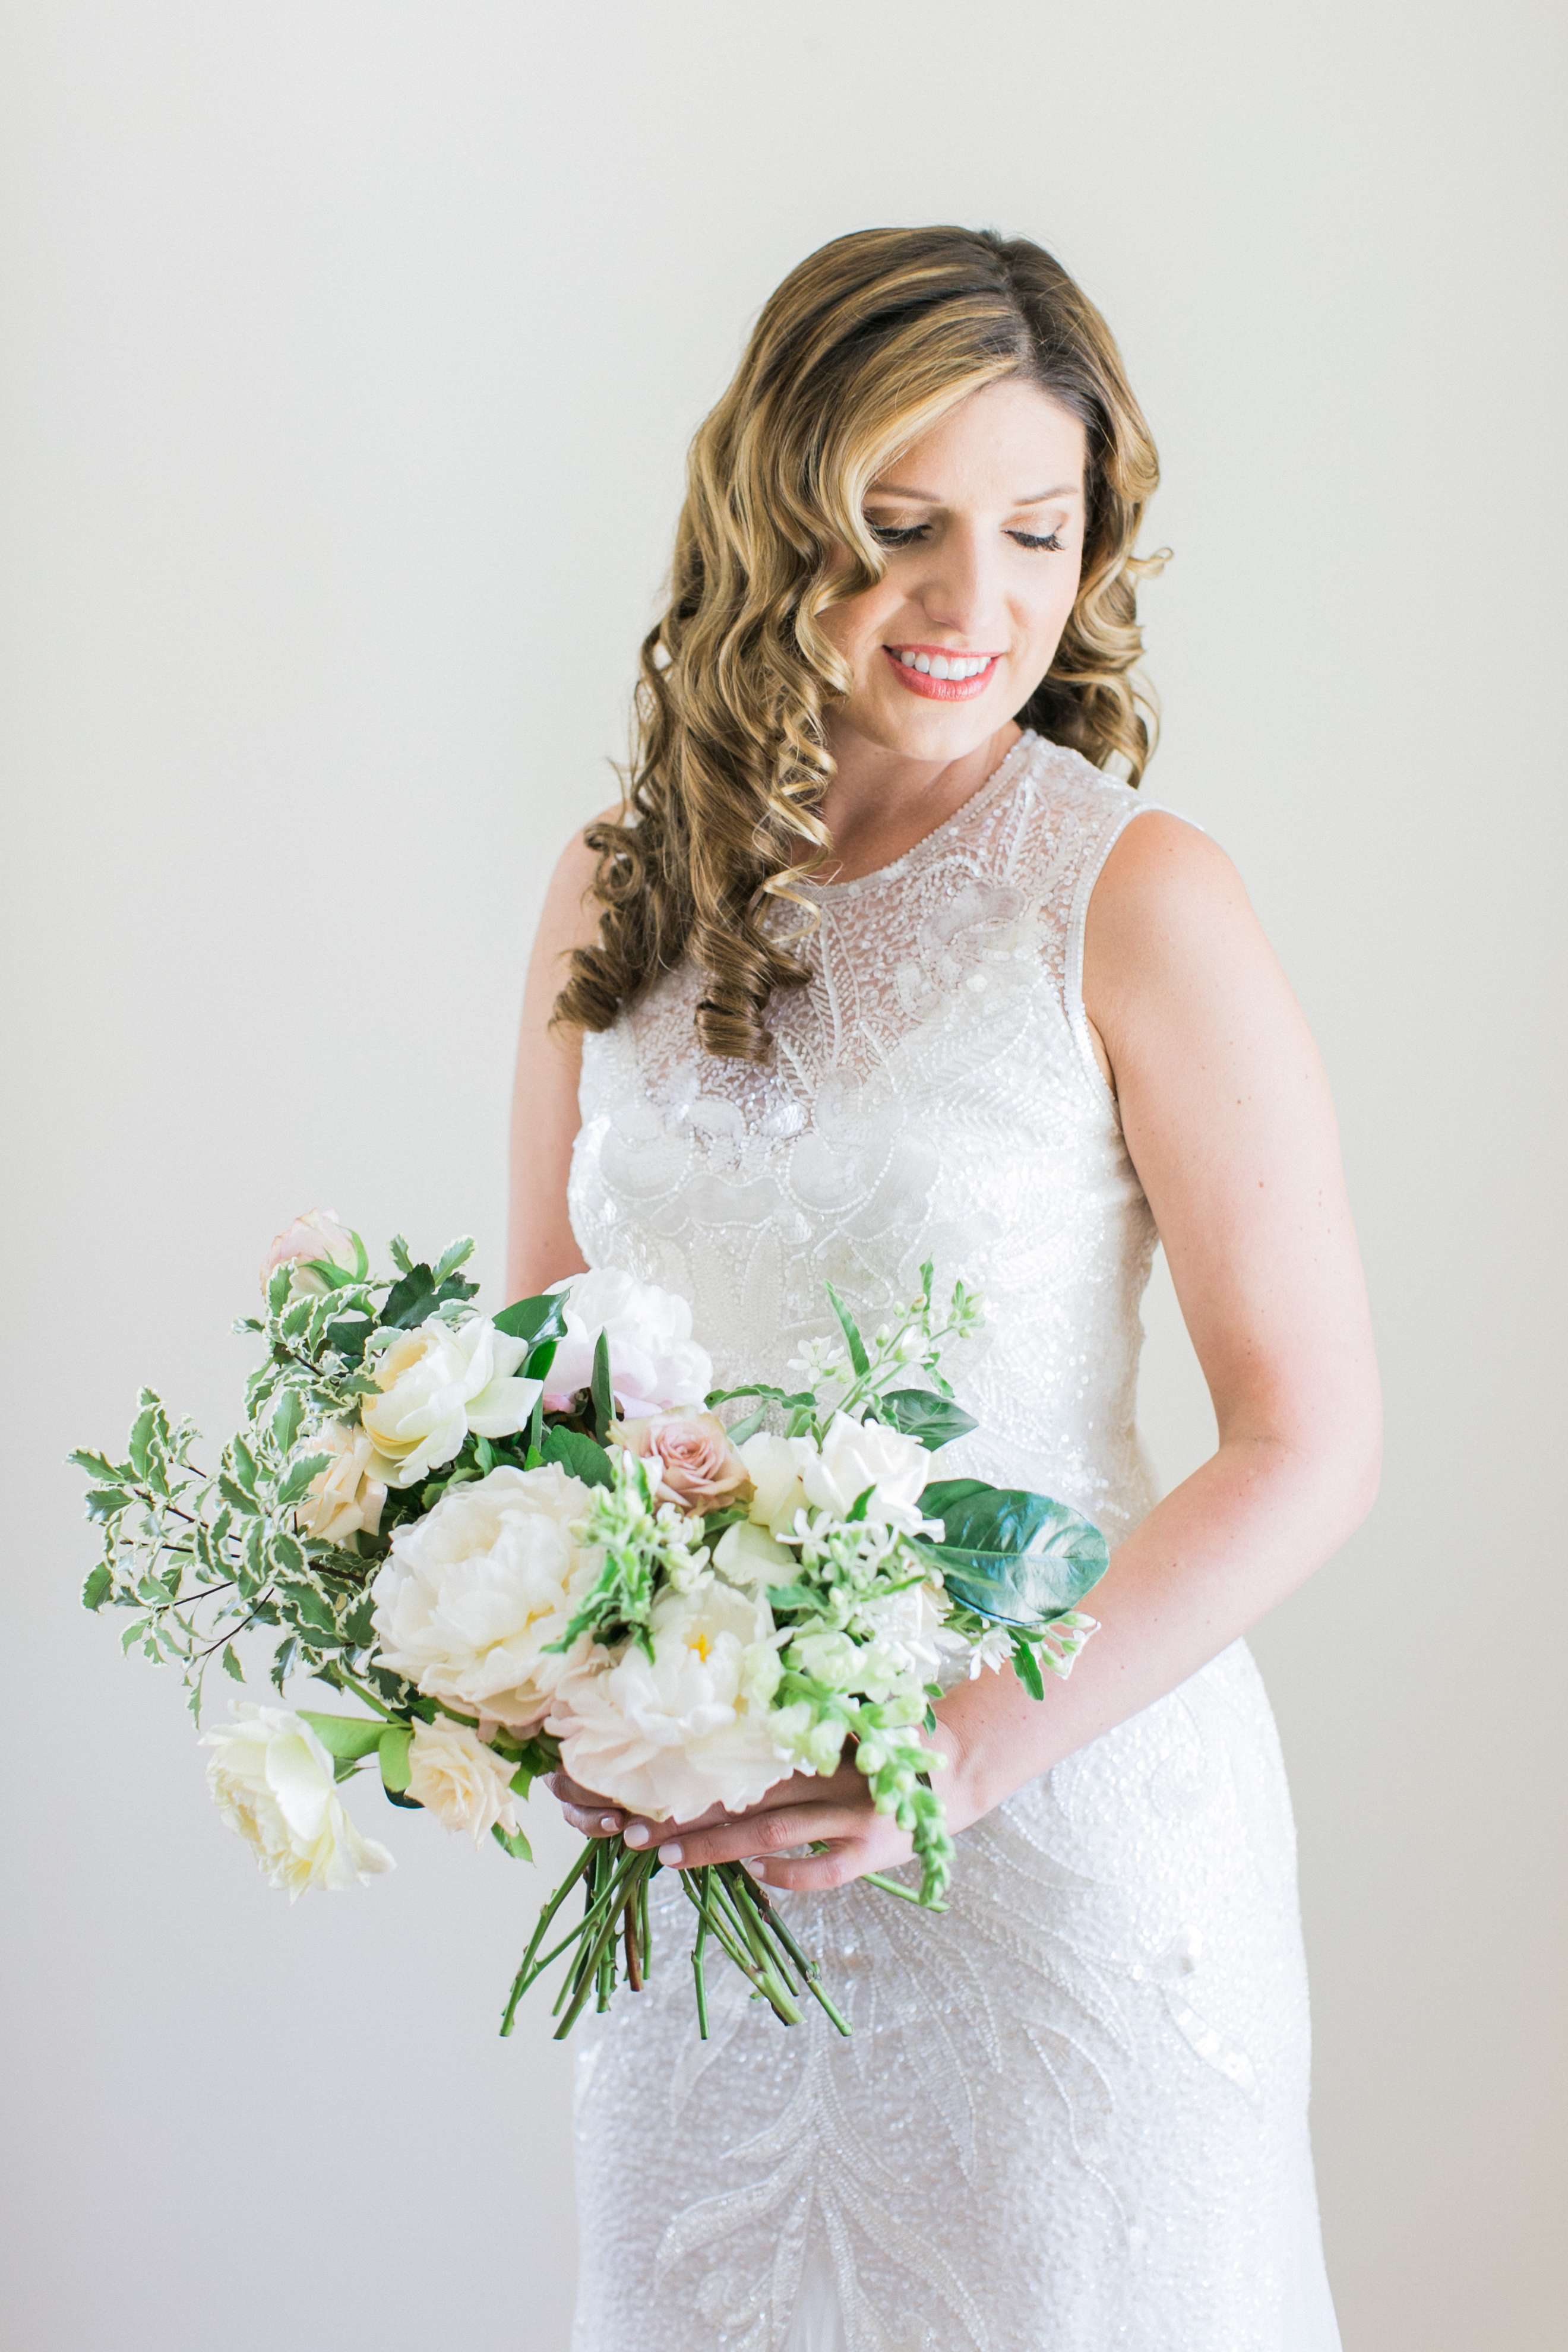 Northport Wedding | The Day's Design | The Weber Photographers